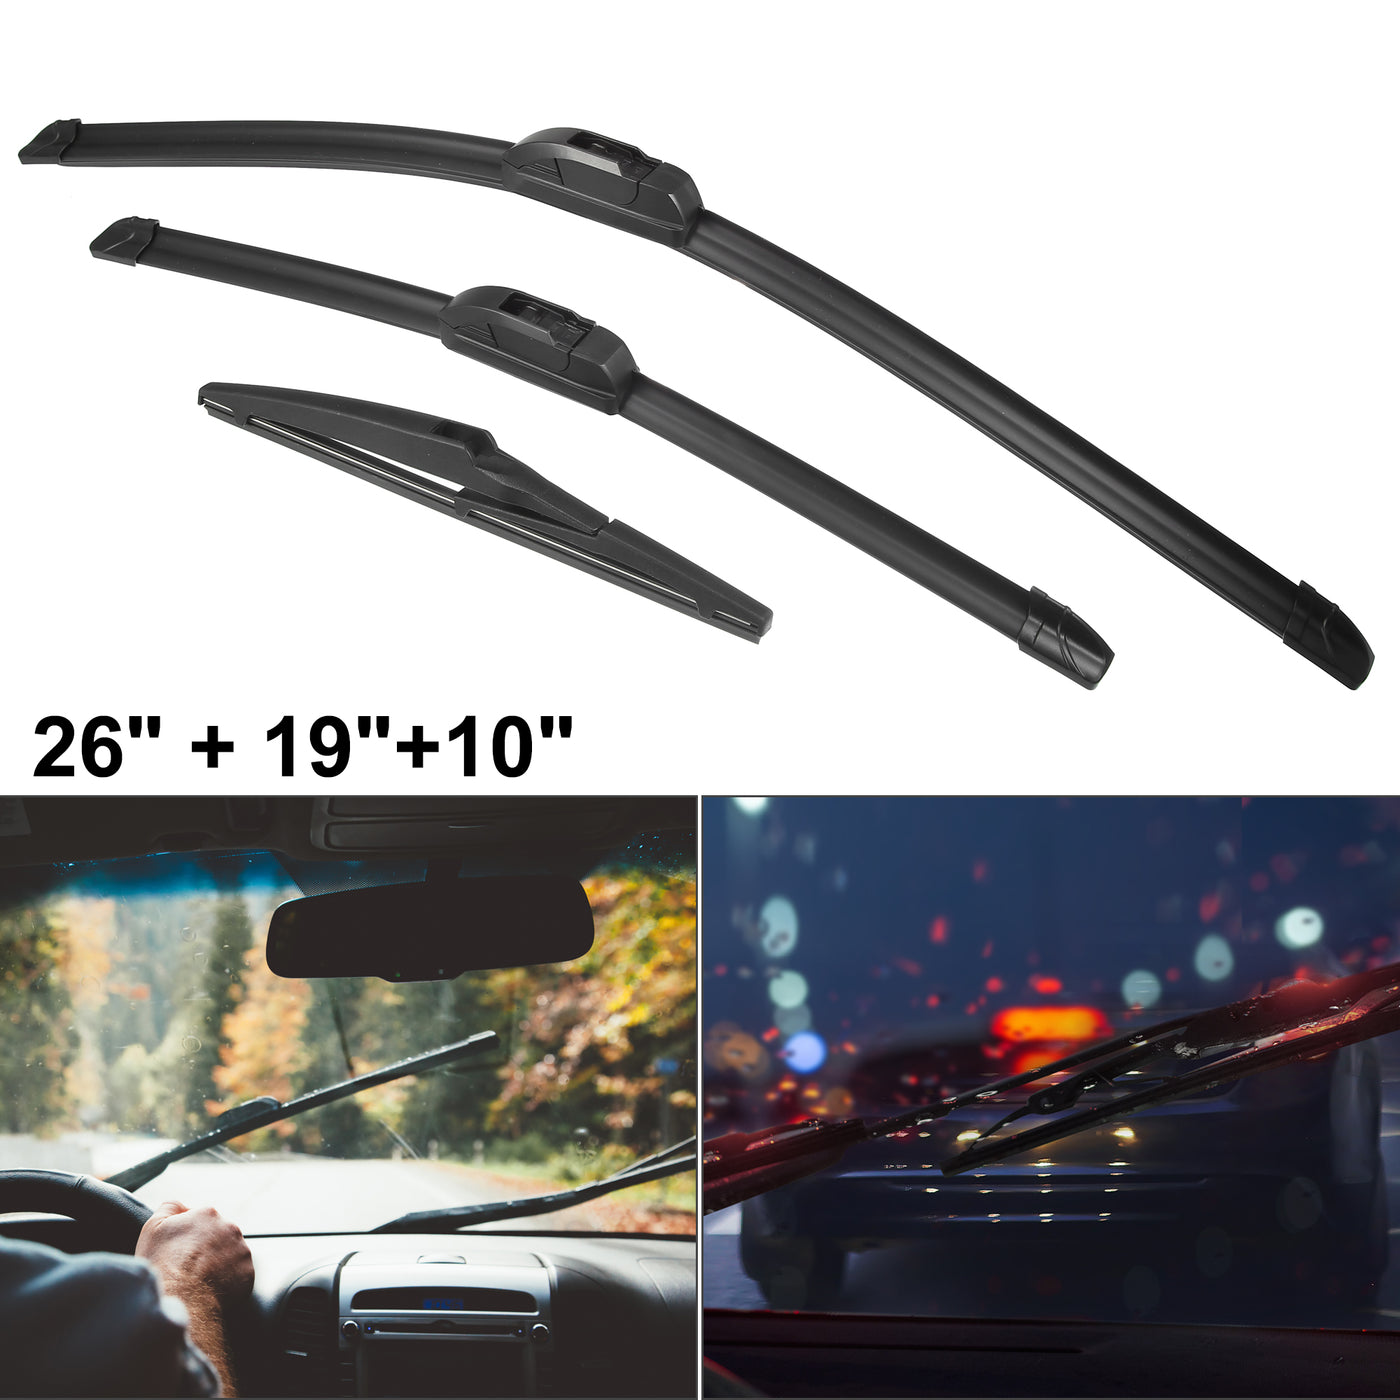 ACROPIX Front Rear Windshield Wiper Blade Set Car Wiper Blade Fit for Toyota Prius V 2012-2018 - Pack of 3 Black